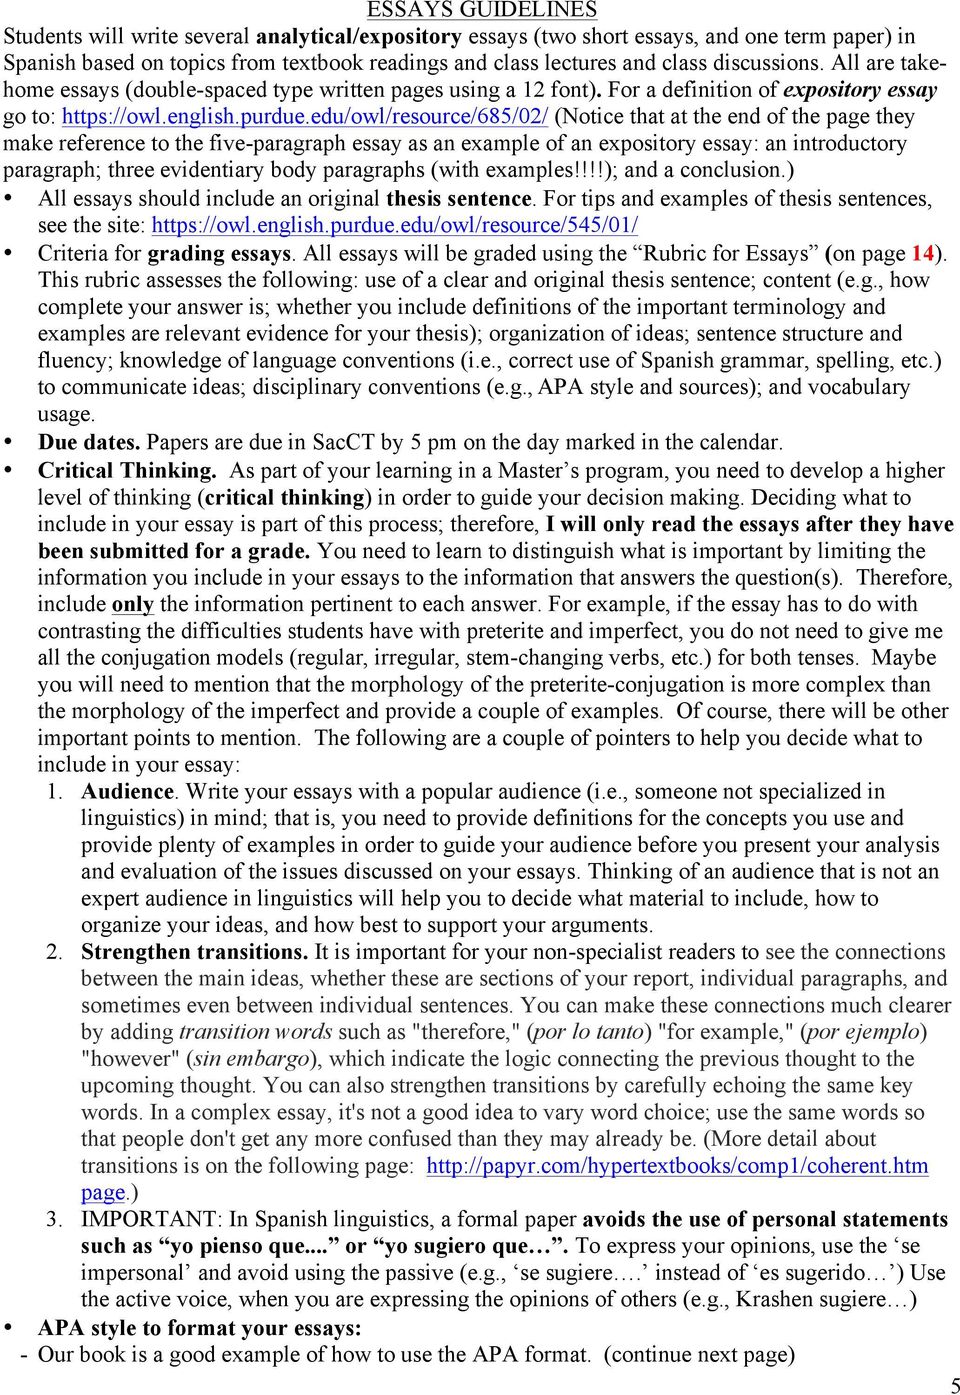 edu/owl/resource/685/02/ (Notice that at the end of the page they make reference to the five-paragraph essay as an example of an expository essay: an introductory paragraph; three evidentiary body